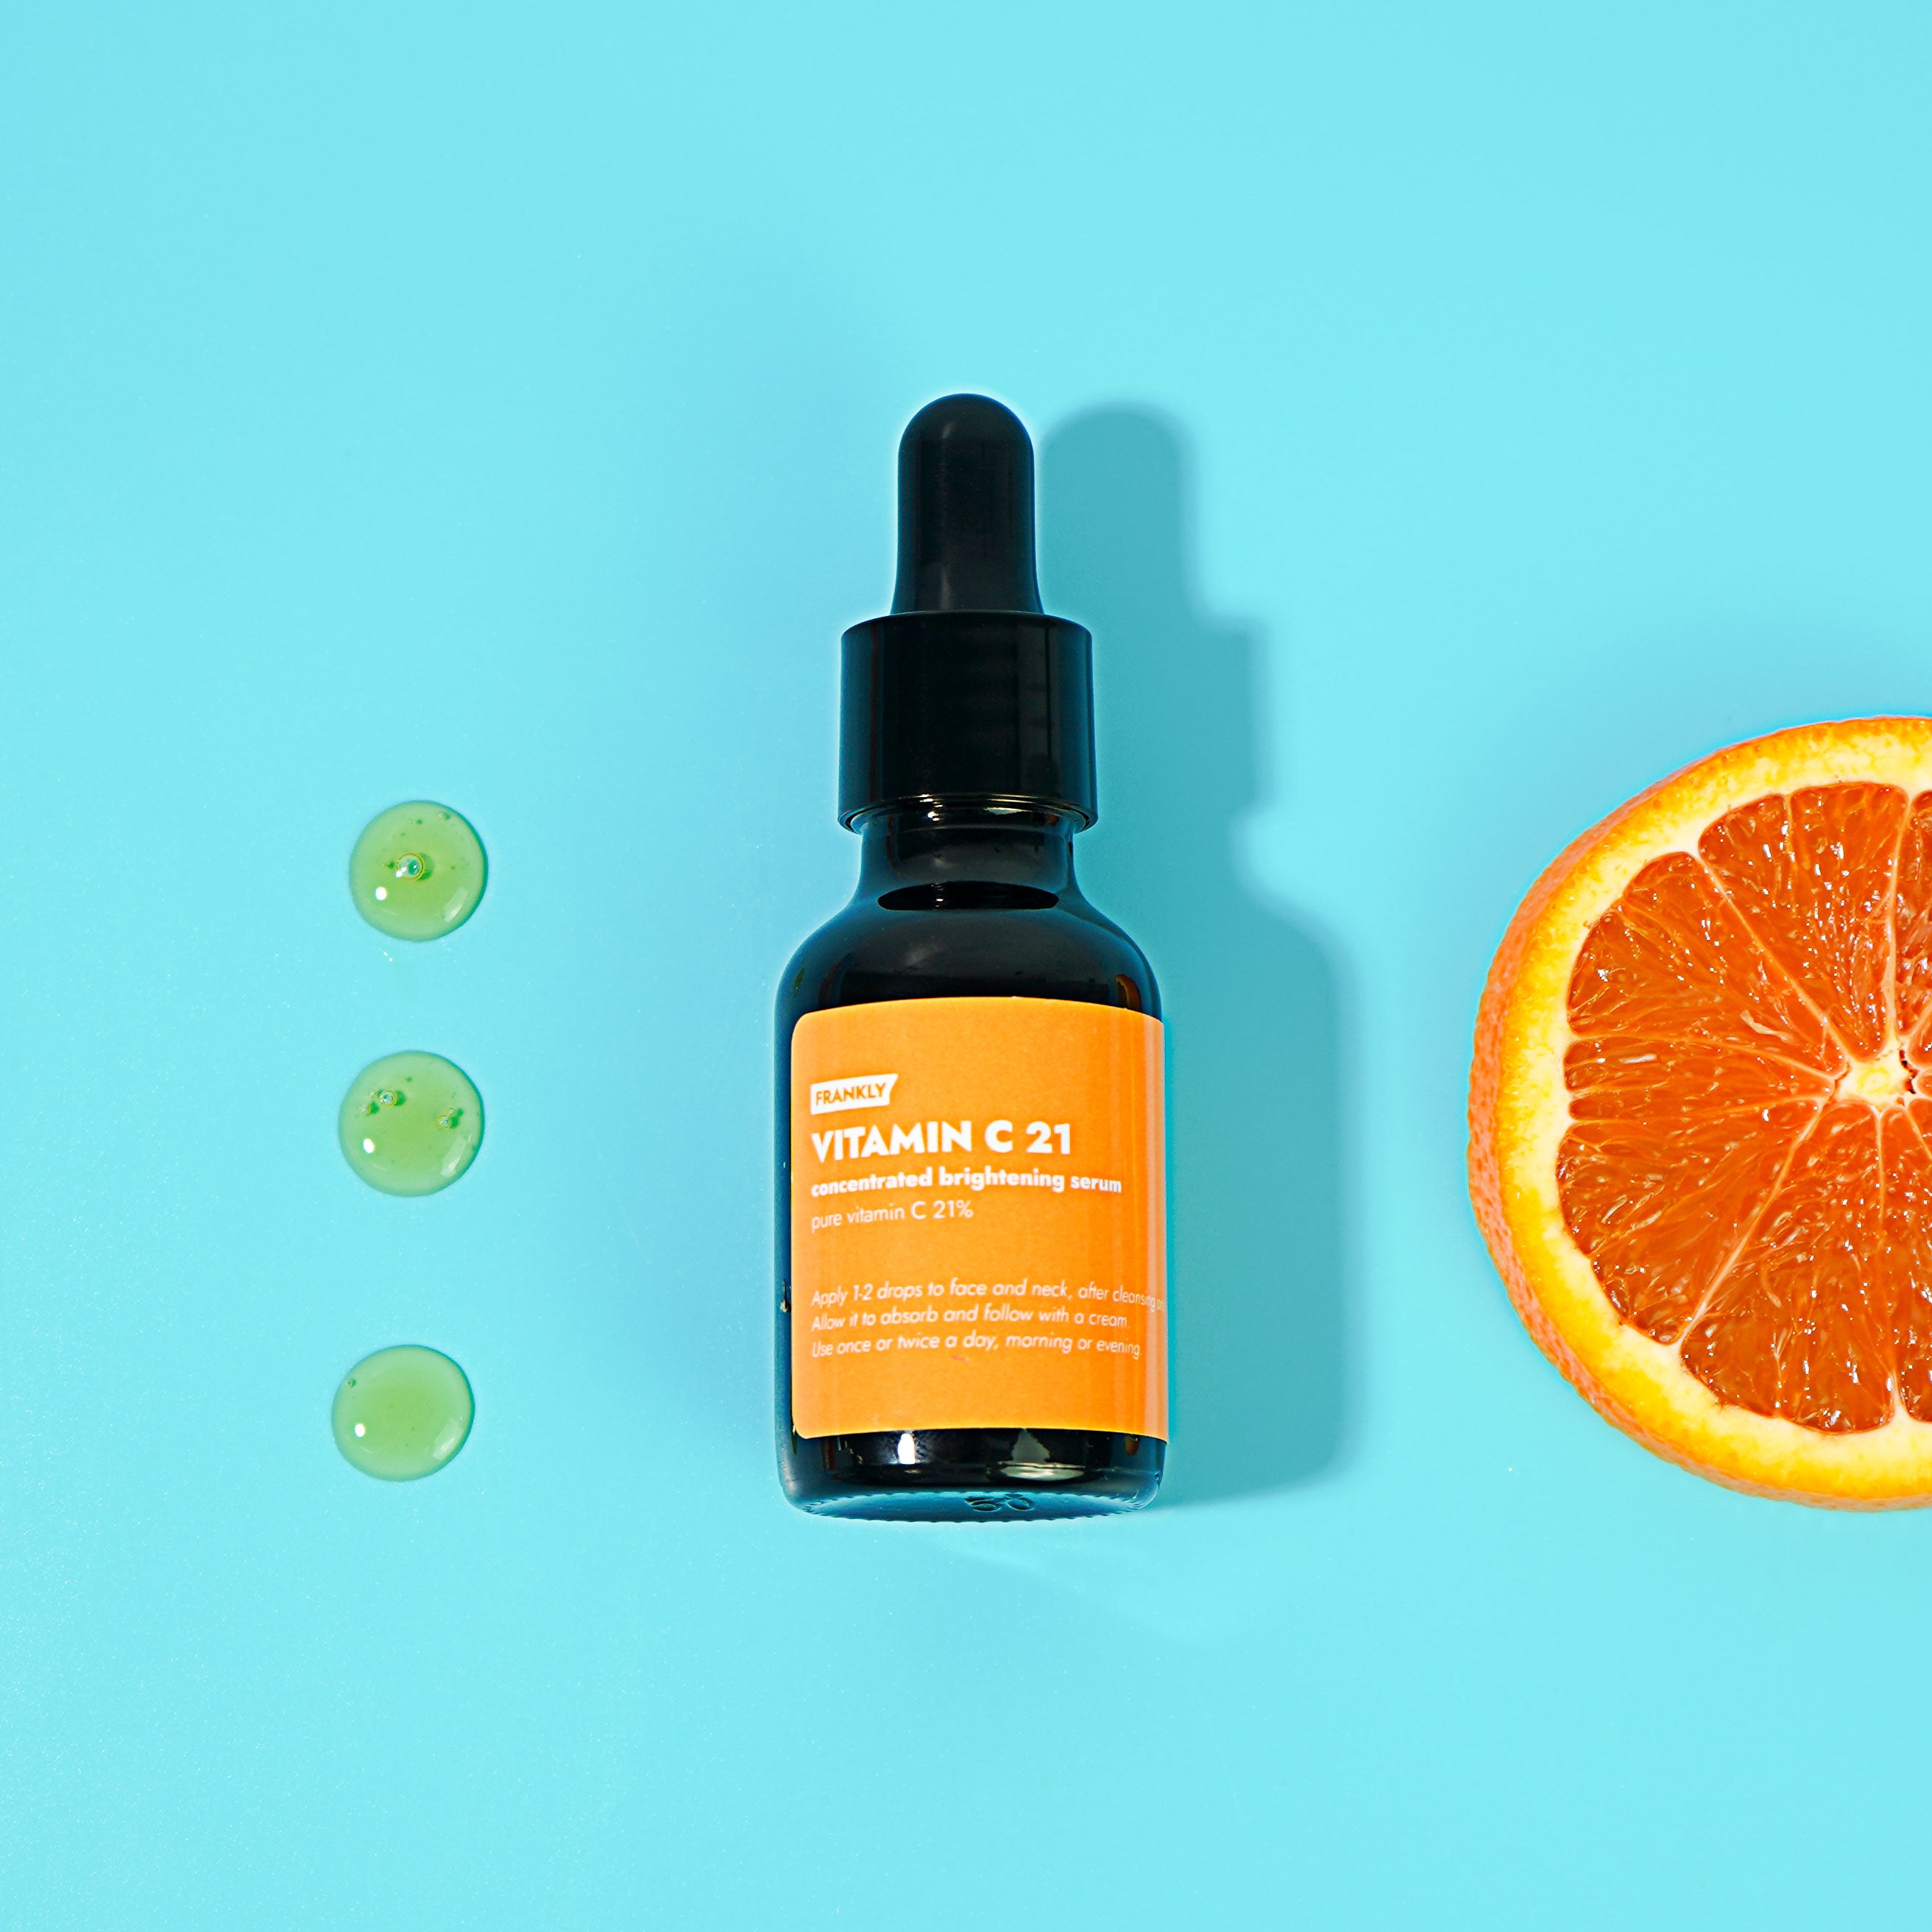 FRANKLY Vitamin C 21% Concentrated Brightening Serum 15ml